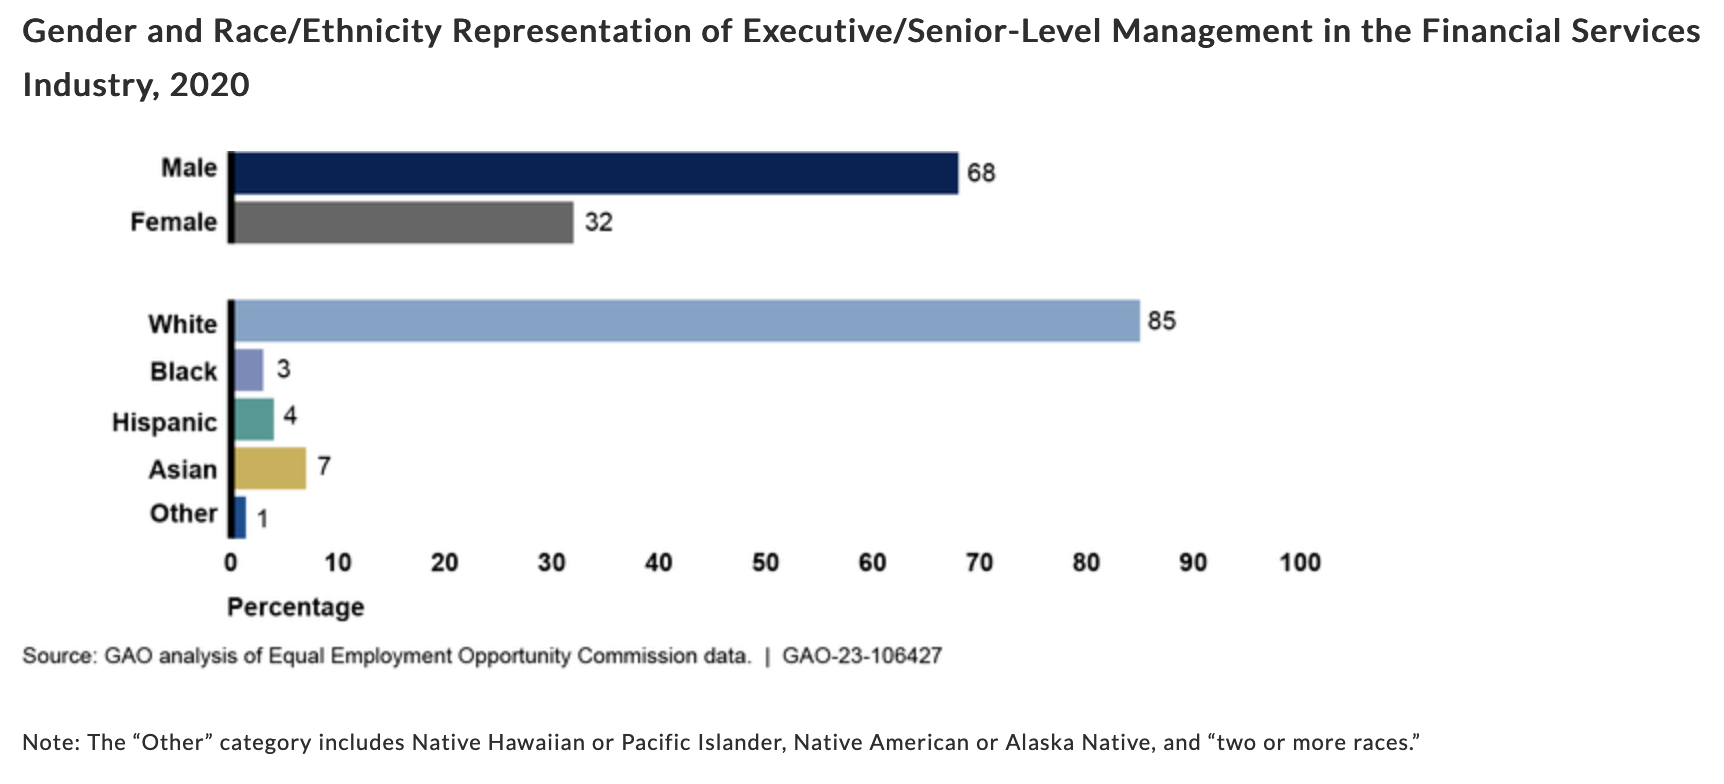 Gender and Race/Ethnicity Representation of Executive/Senior-Level Management in the Financial Services Industry, 2020 